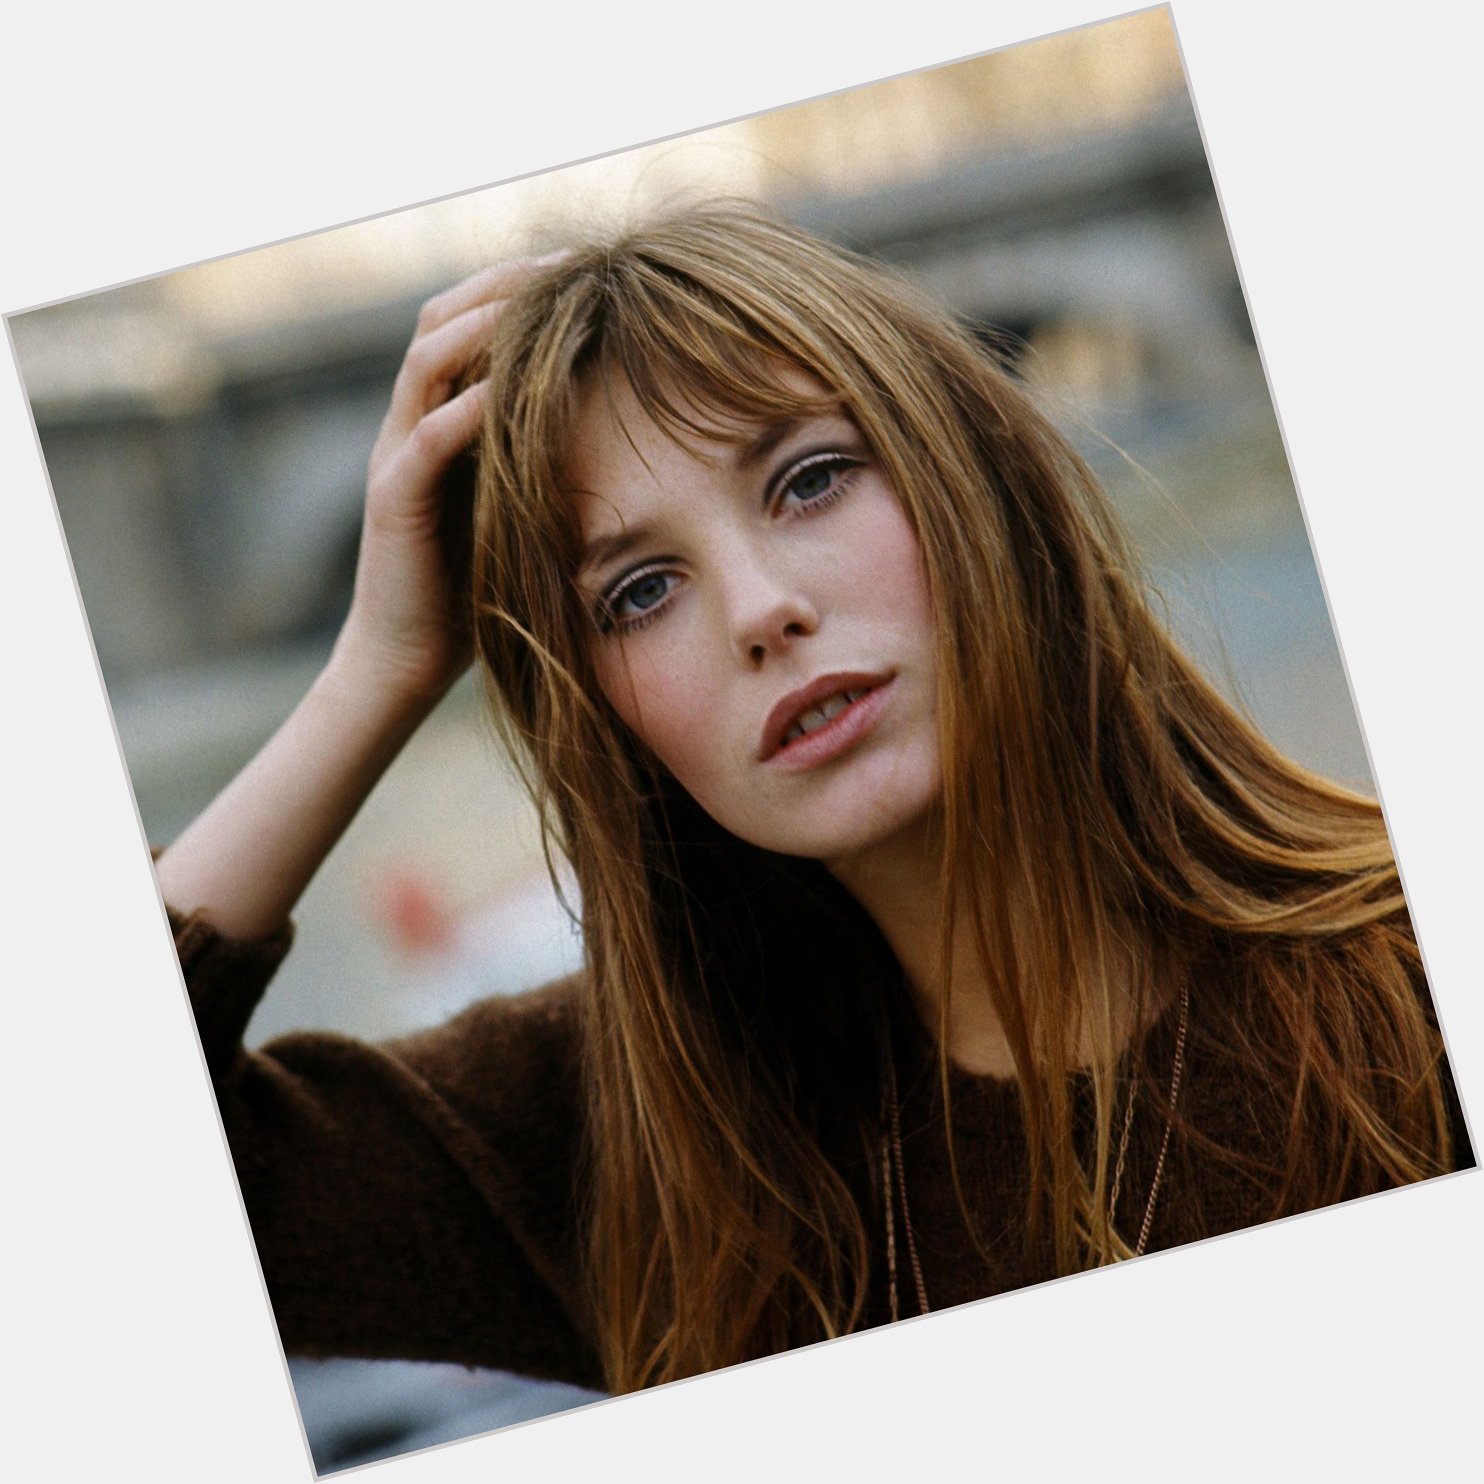 Please join us here at in wishing the one and only Jane Birkin a very Happy Birthday today  